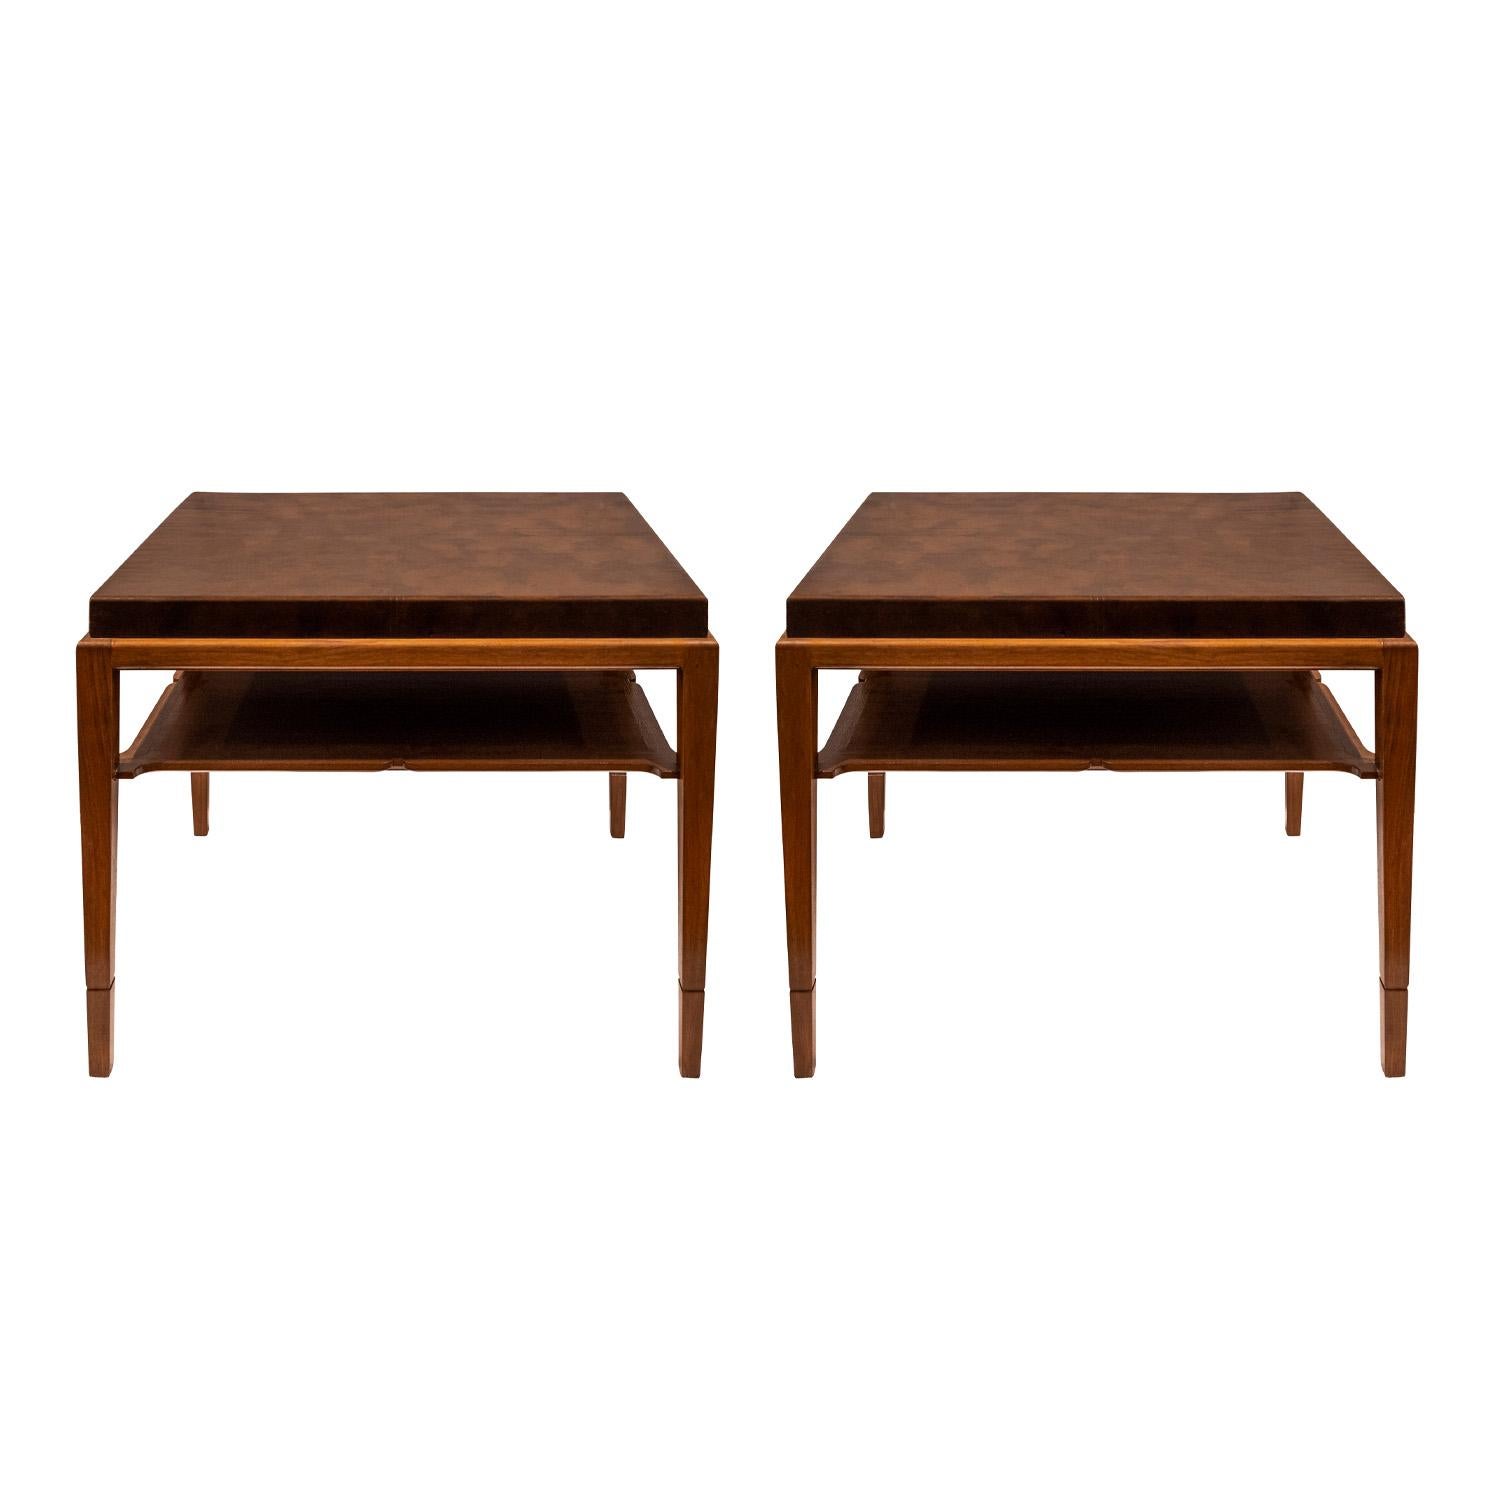 Pair of highly refined end tables model 210 in mahogany with shelves and custom original tortoishell leather tops by Tommi Parzinger for Charak Modern, American 1940's.  As with all Parzinger pieces, these exude attention to detail and superb